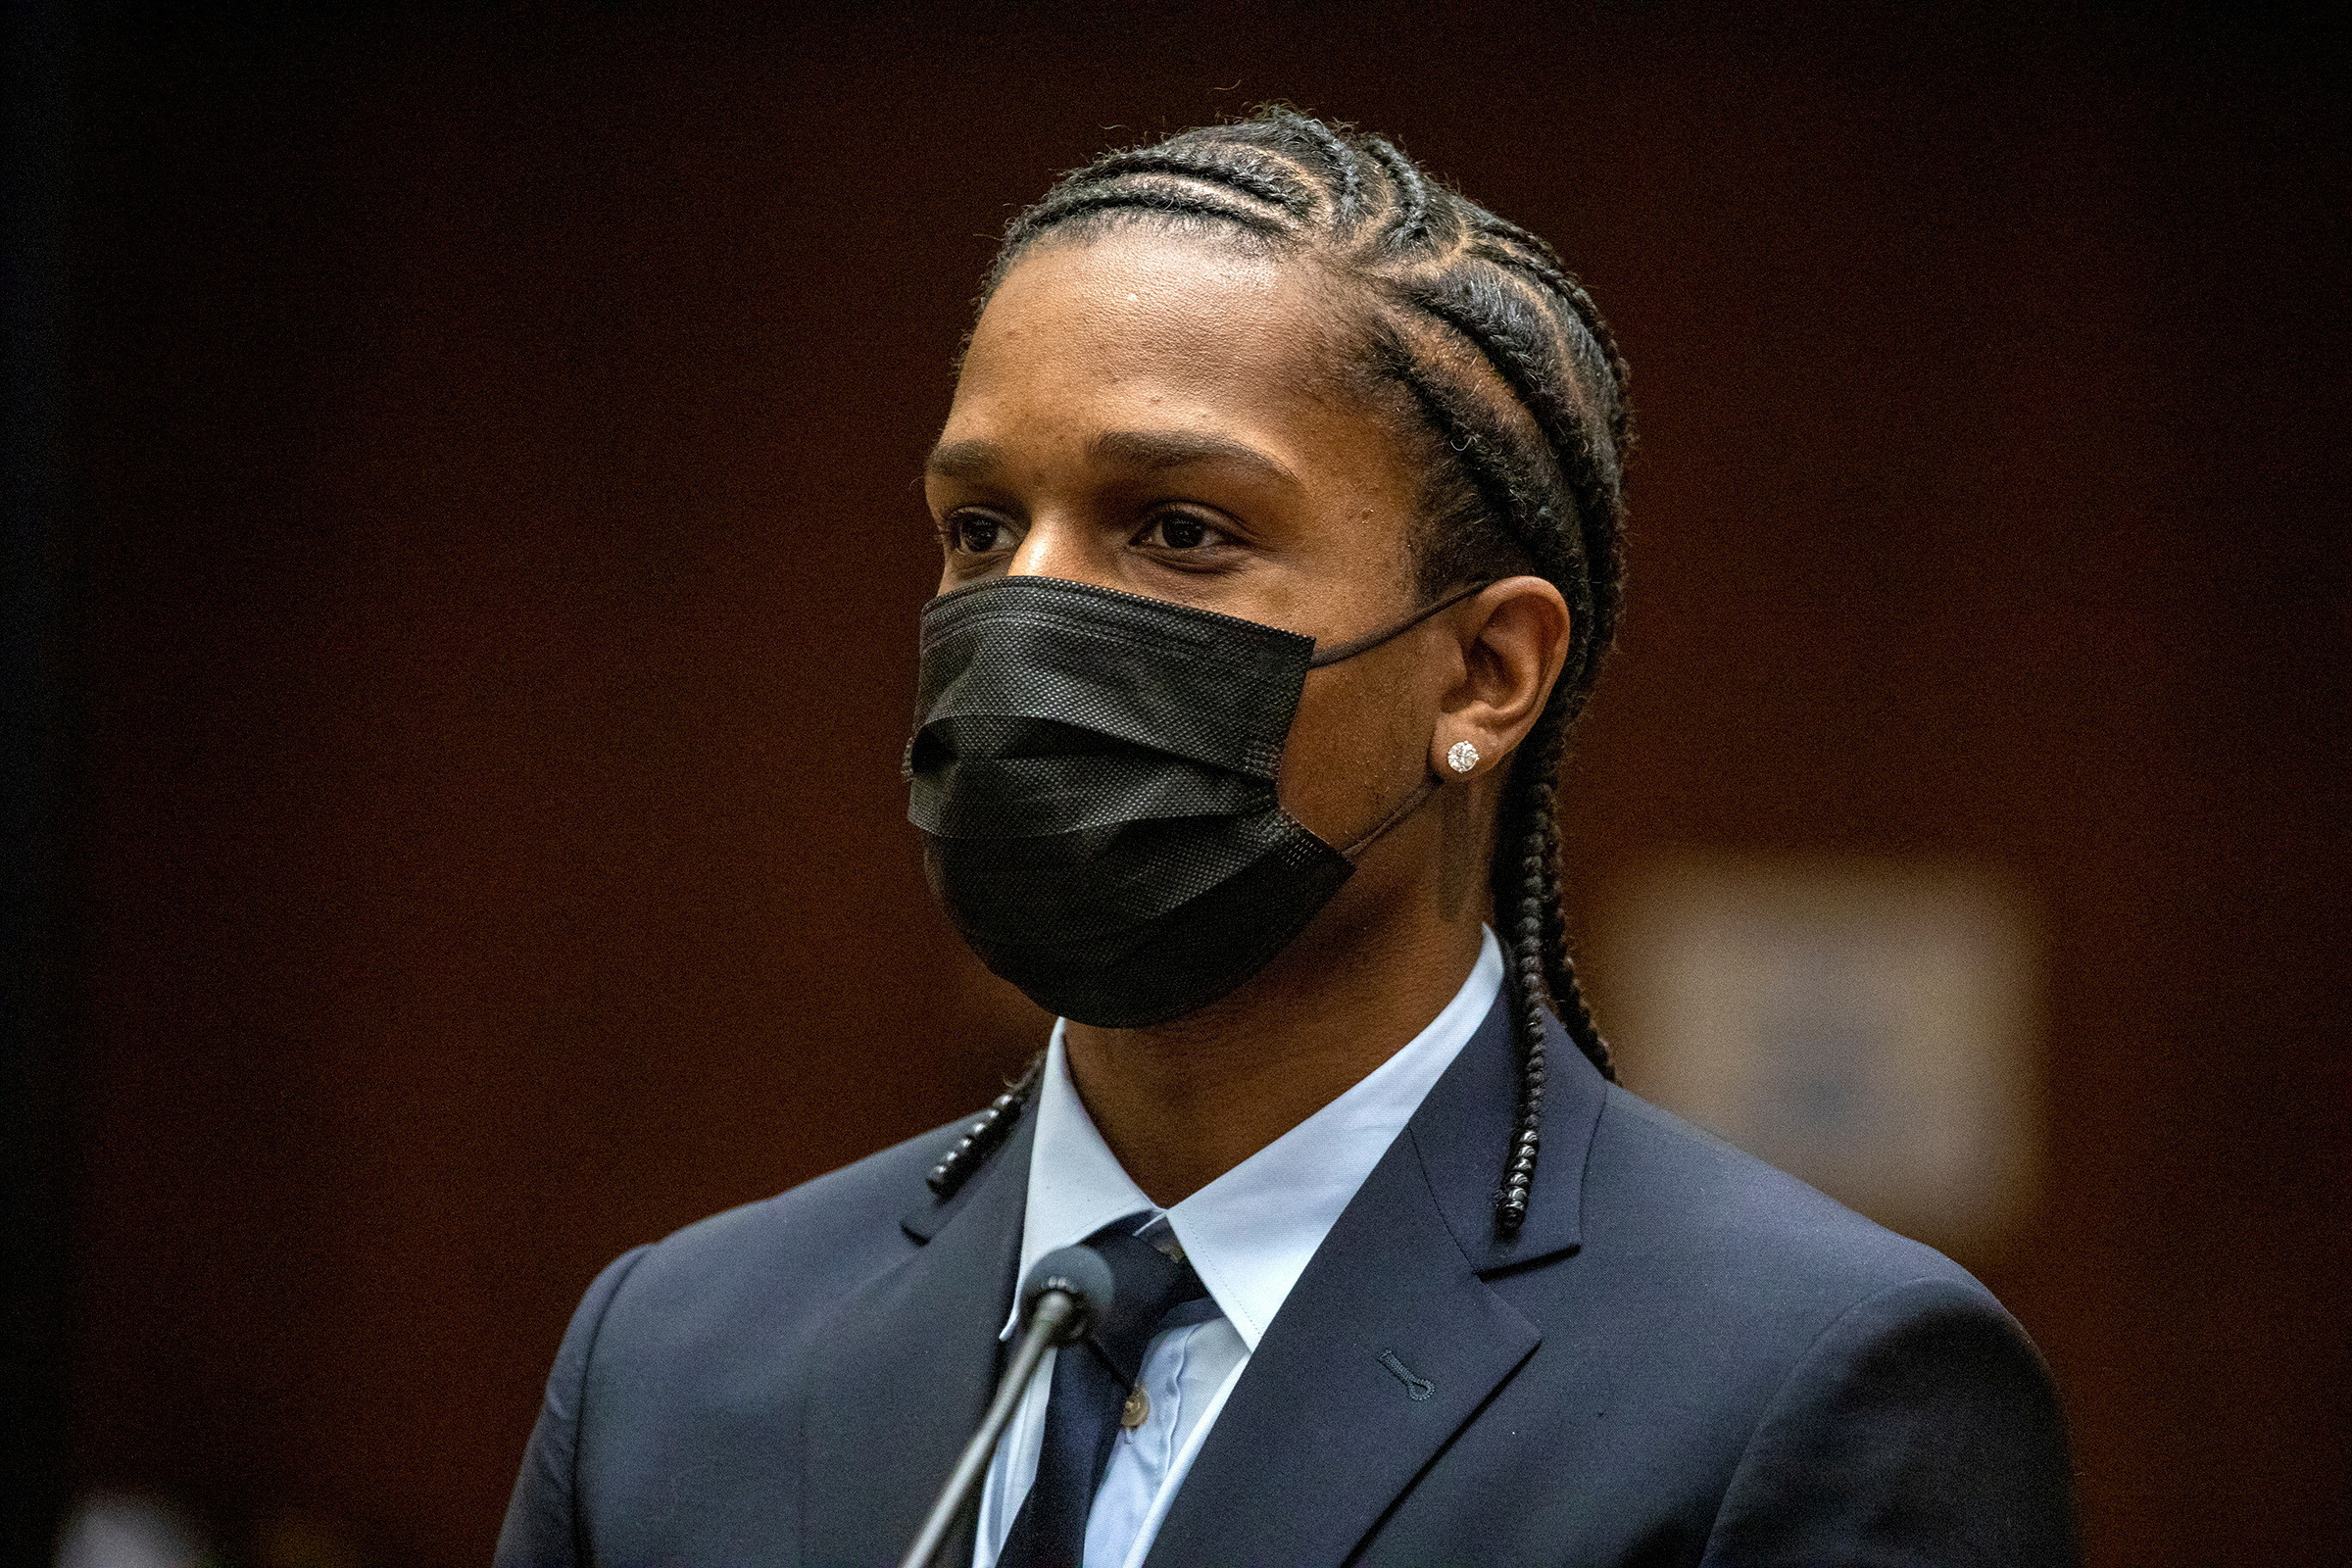 Rakim Mayers, the rapper known as A$AP Rocky at his arraignment in Los Angeles